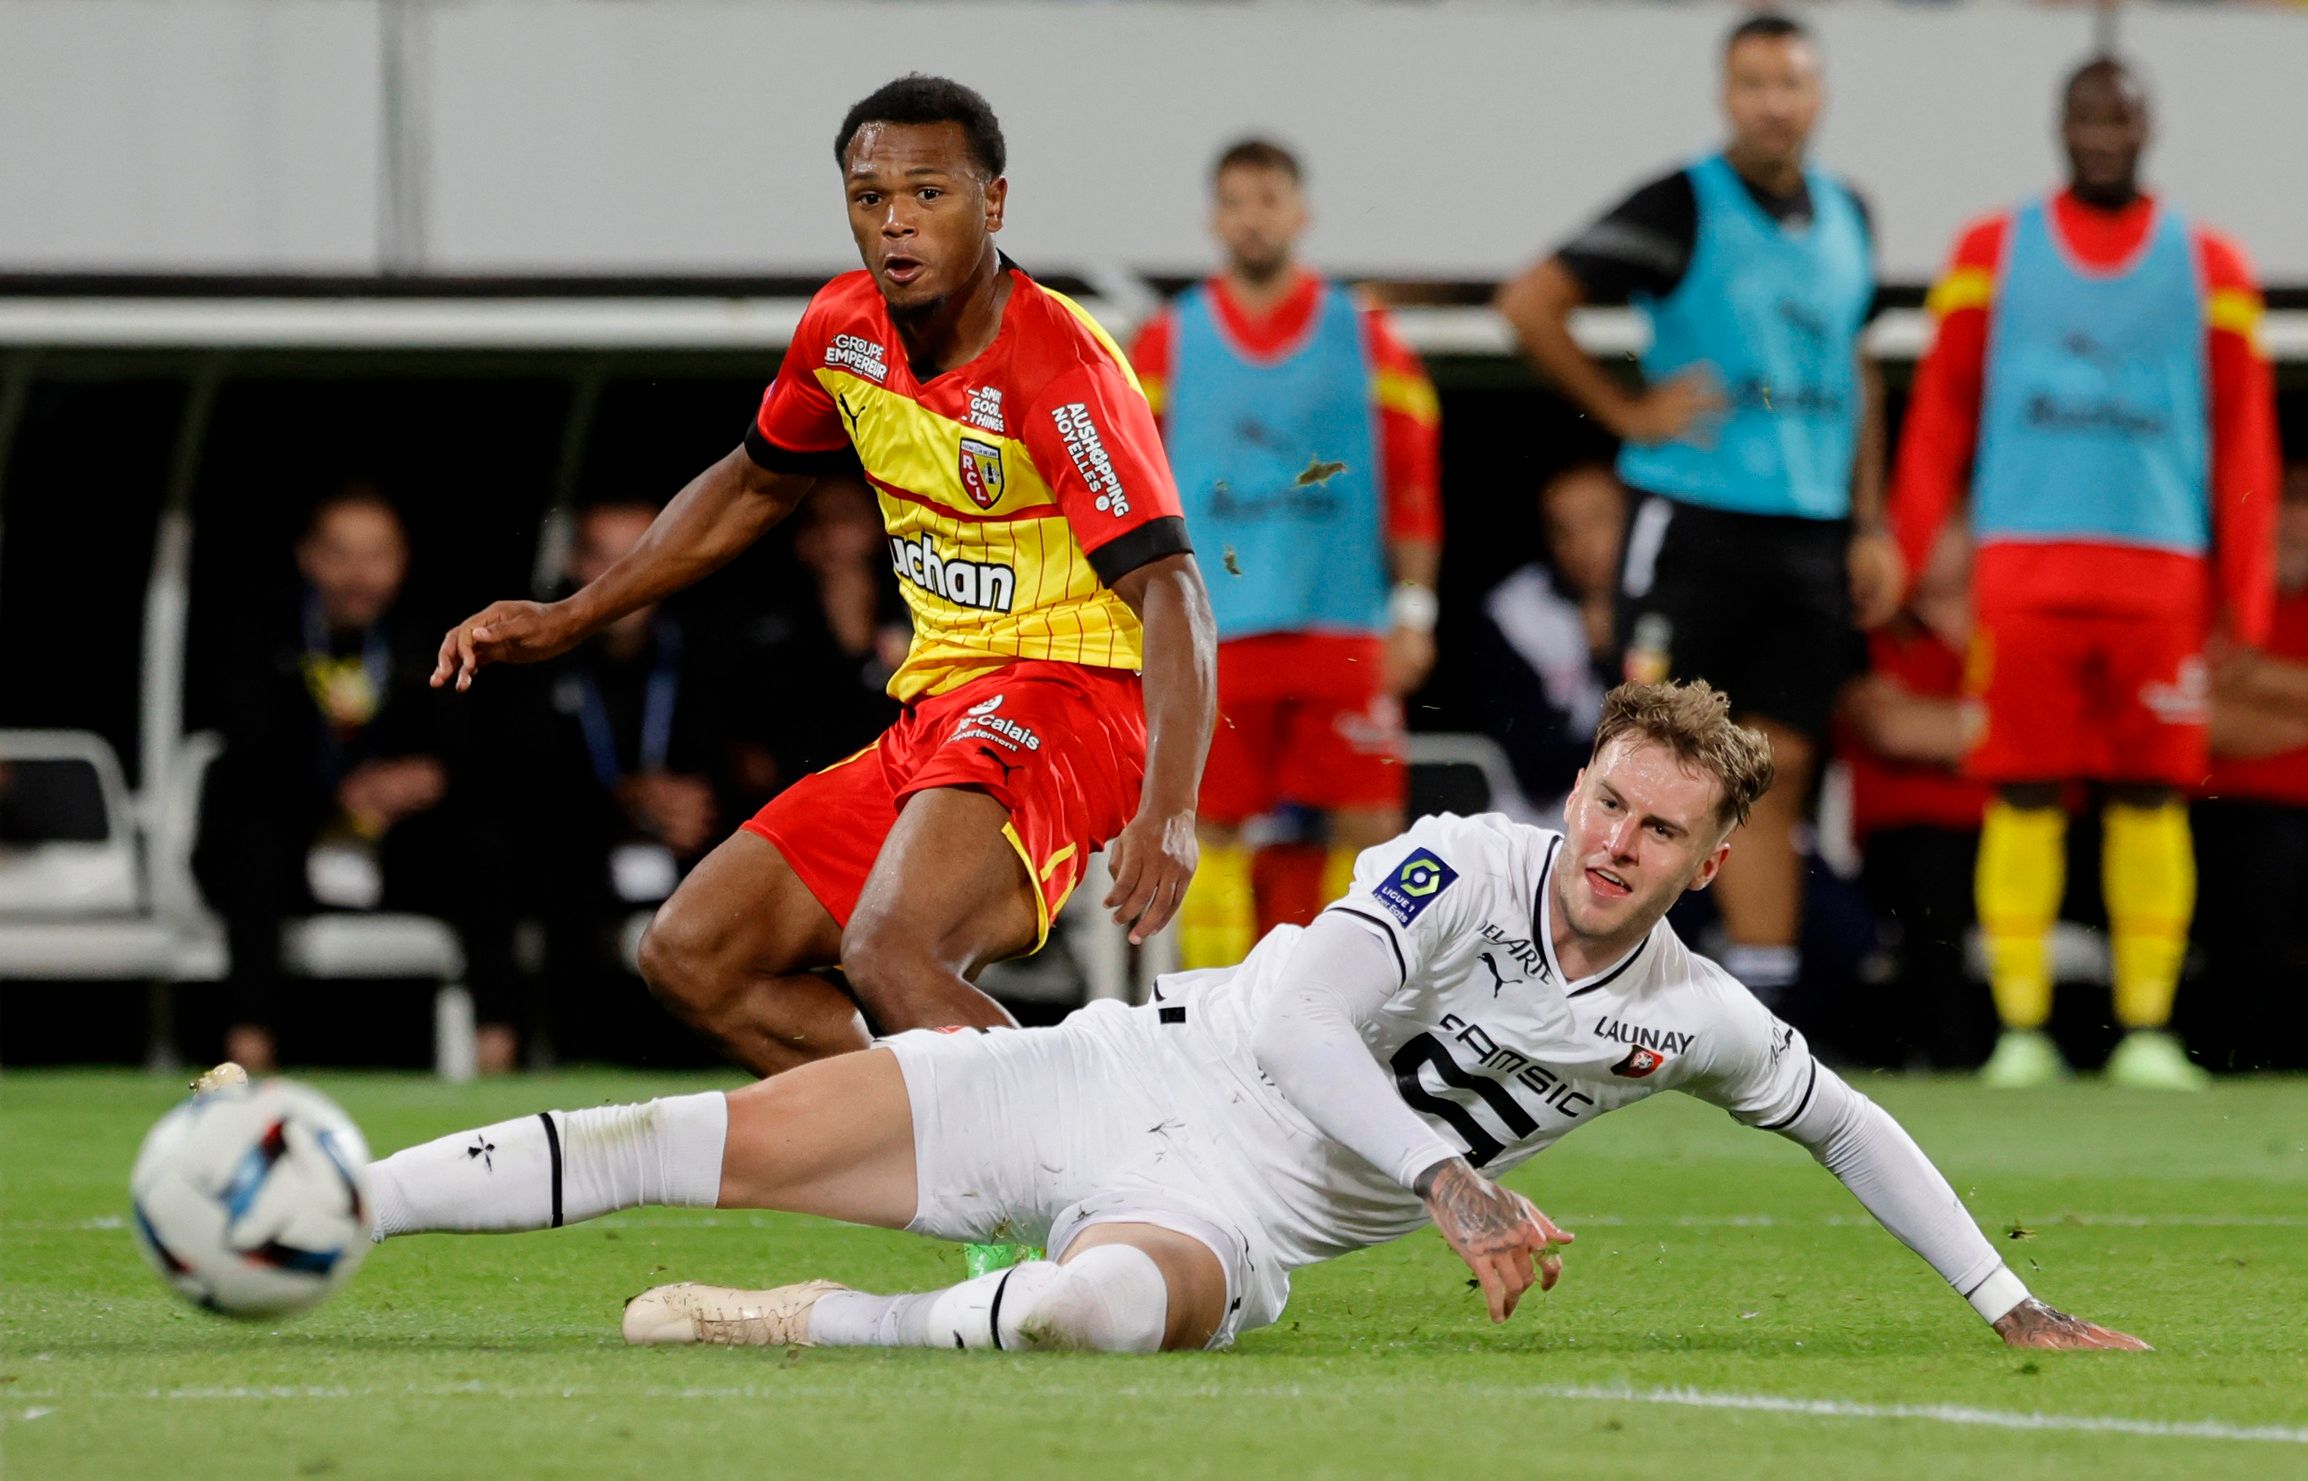 Soccer Football - Ligue 1 - RC Lens v Stade Rennes - Stade Bollaert-Delelis, Lens, France - August 27, 2022 RC Lens' Lois Openda in action with Stade Rennes' Joe Rodon REUTERS/Pascal Rossignol